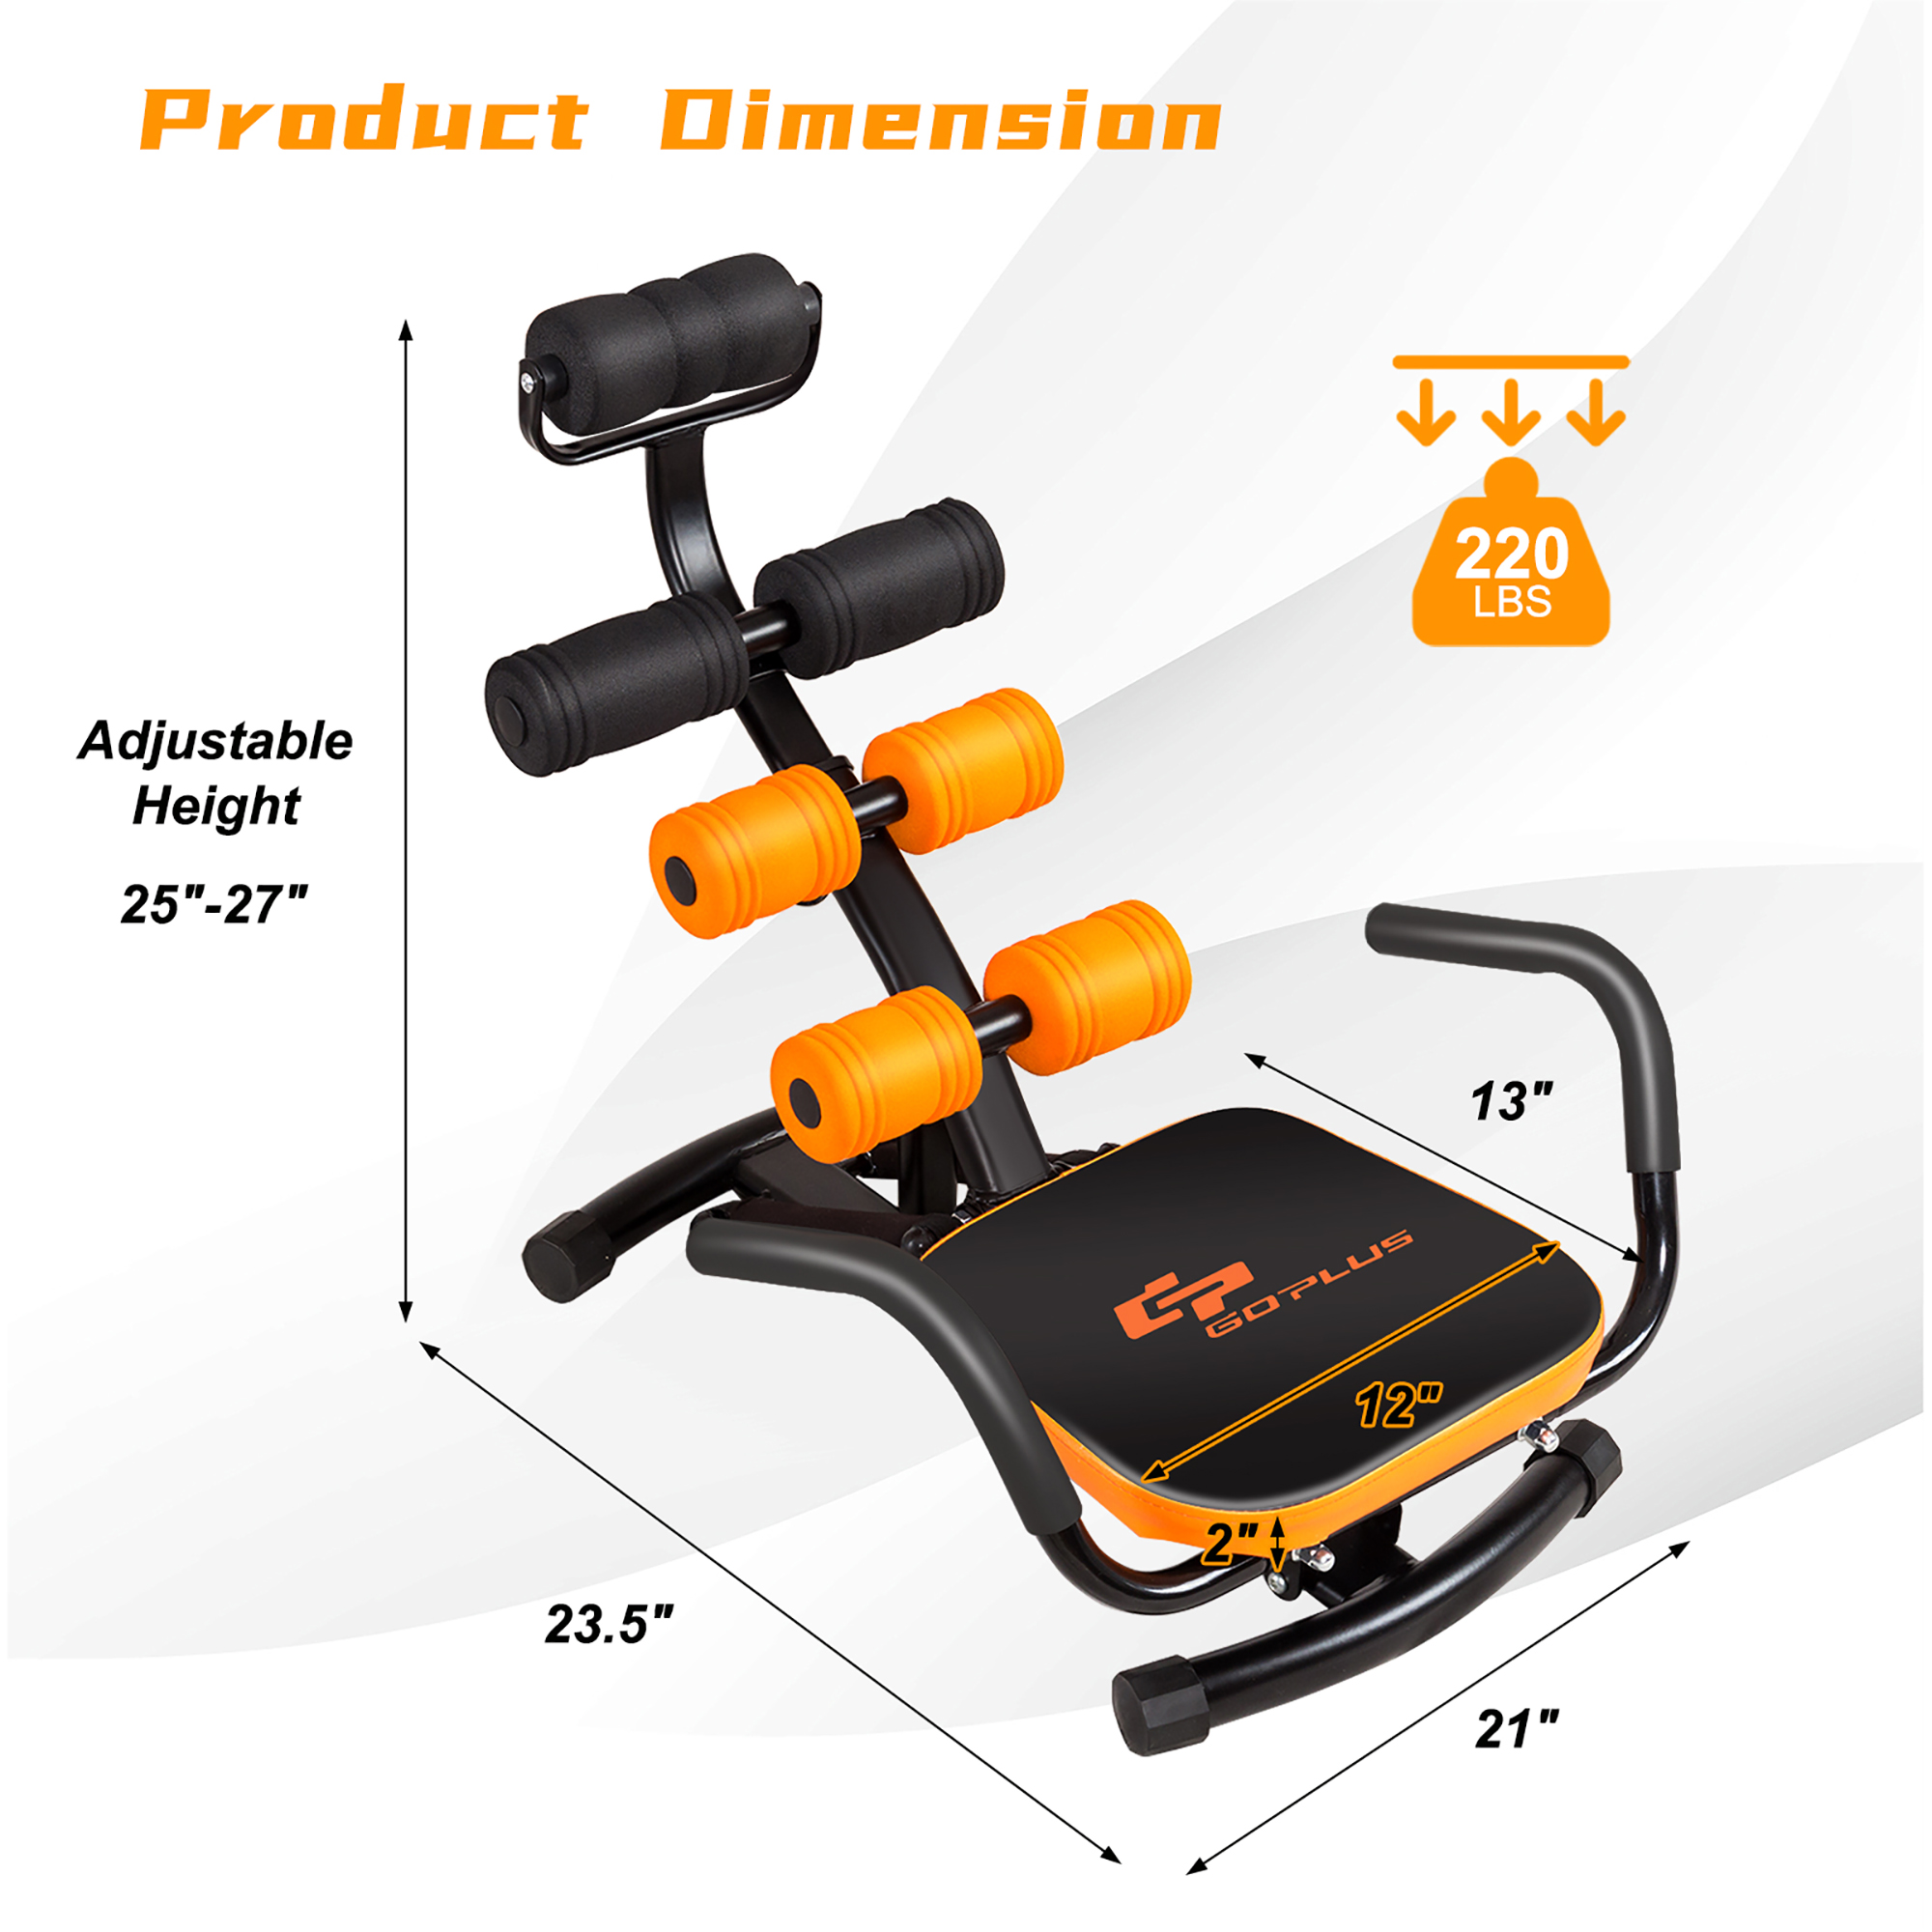 Costway Core Ab Trainer Bench Abdominal Stomach Exerciser Workout Gym Fitness Machine - image 9 of 9